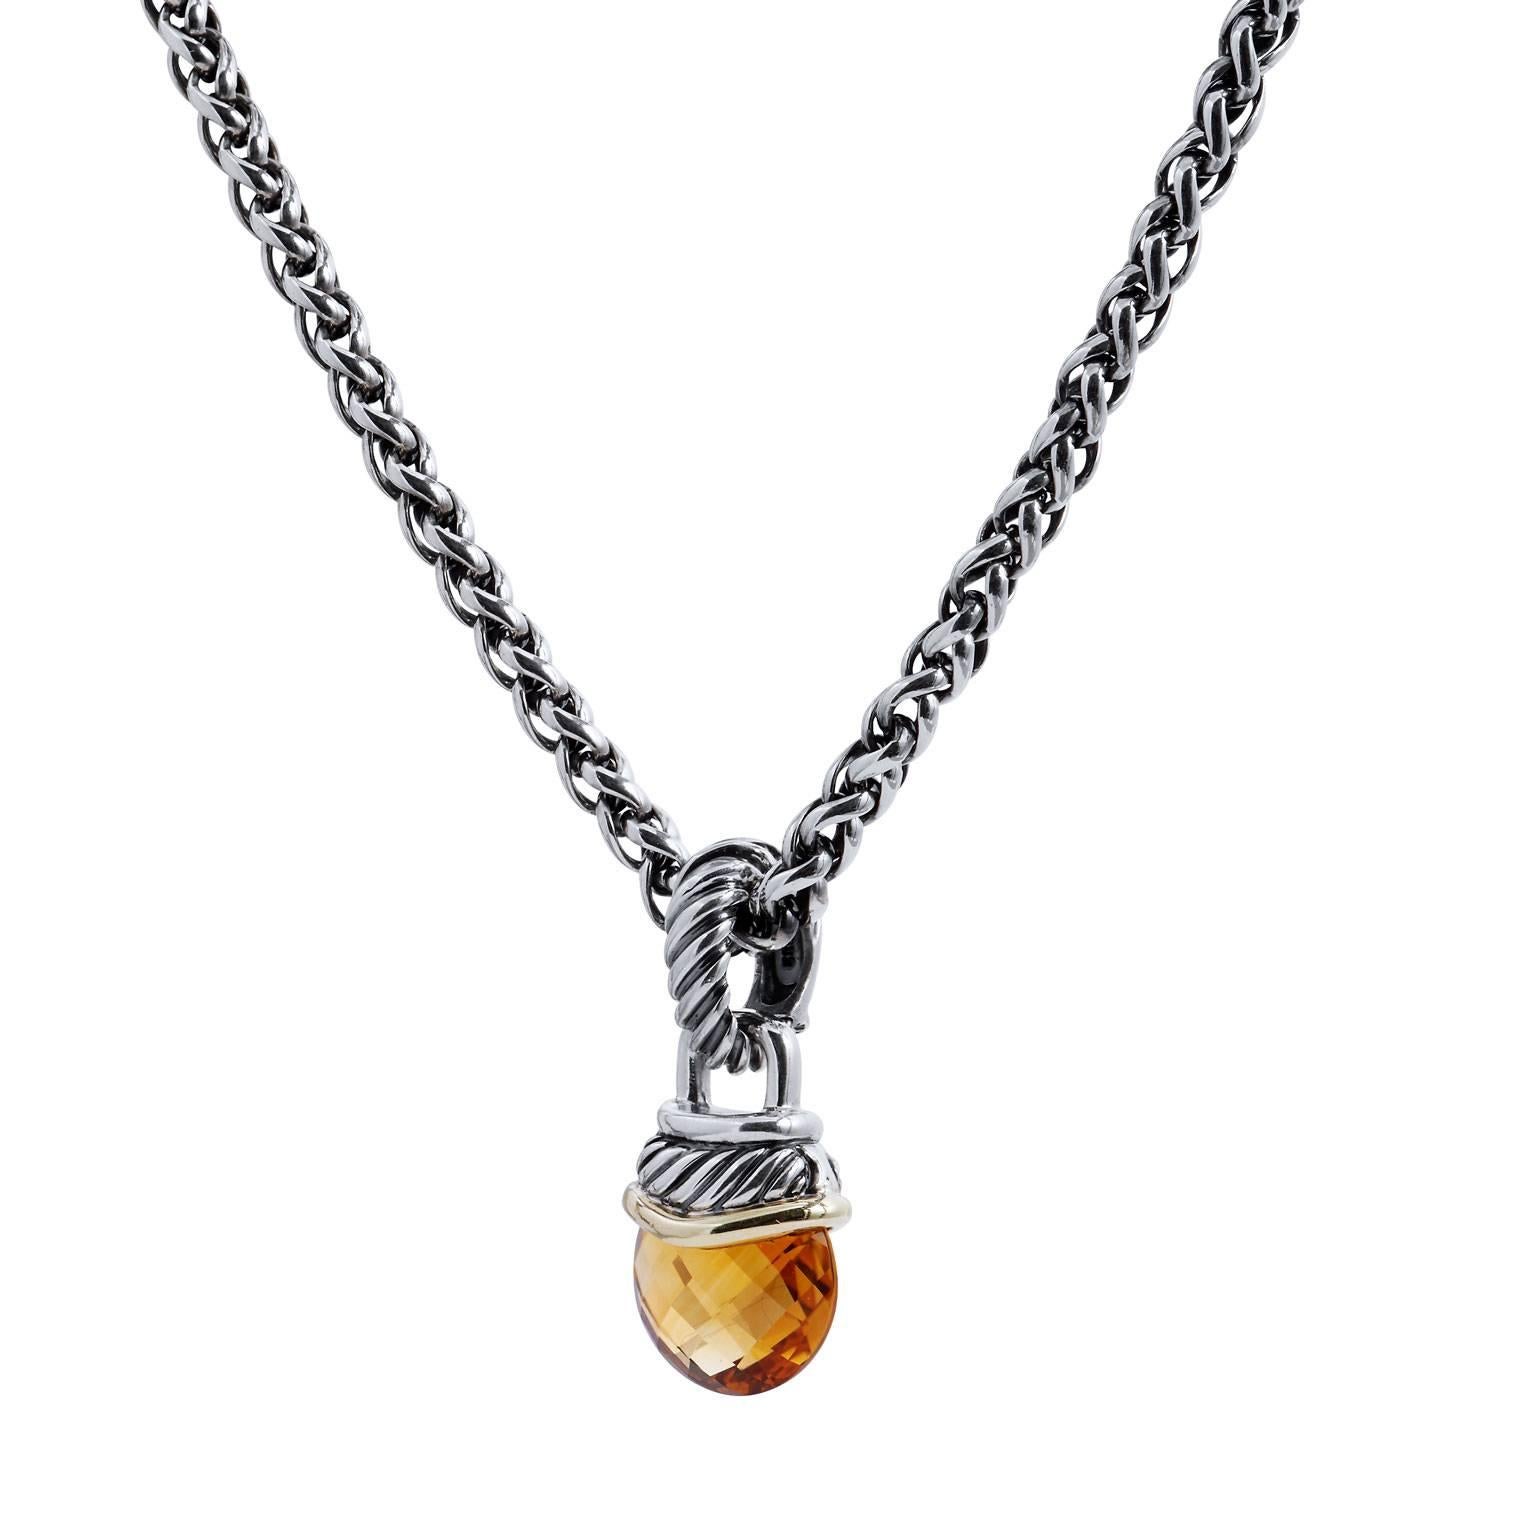 Enjoy this previously loved David Yurman citrine acorn pendant necklace in 14 karat yellow gold and silver. 